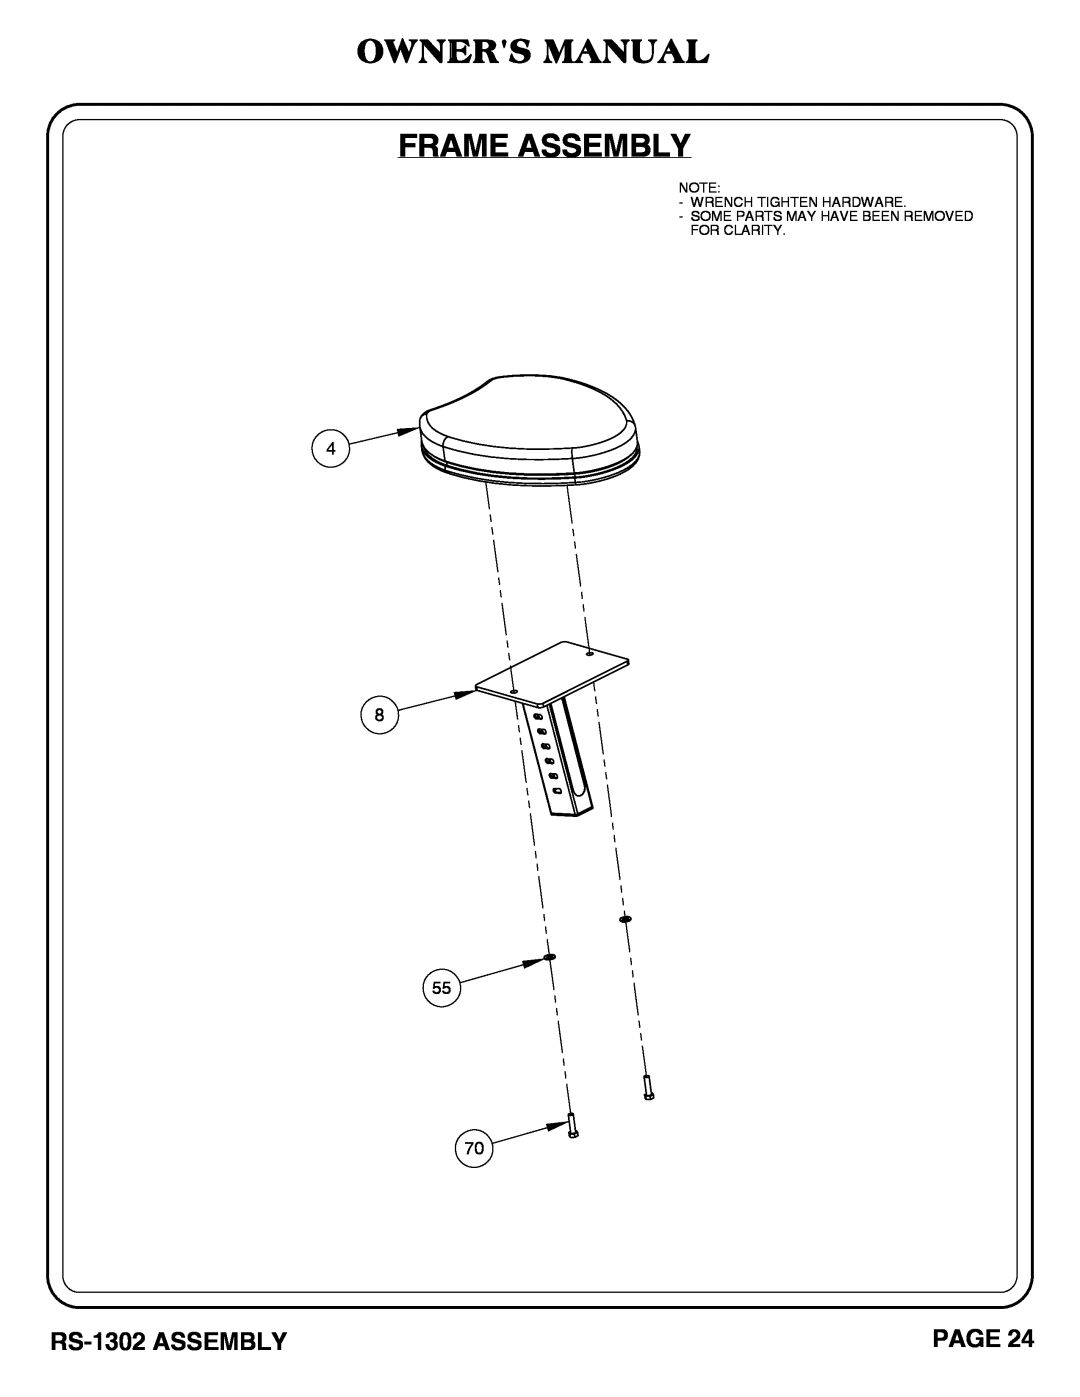 Hoist Fitness owner manual Owners Manual Frame Assembly, RS-1302 ASSEMBLY, Page 